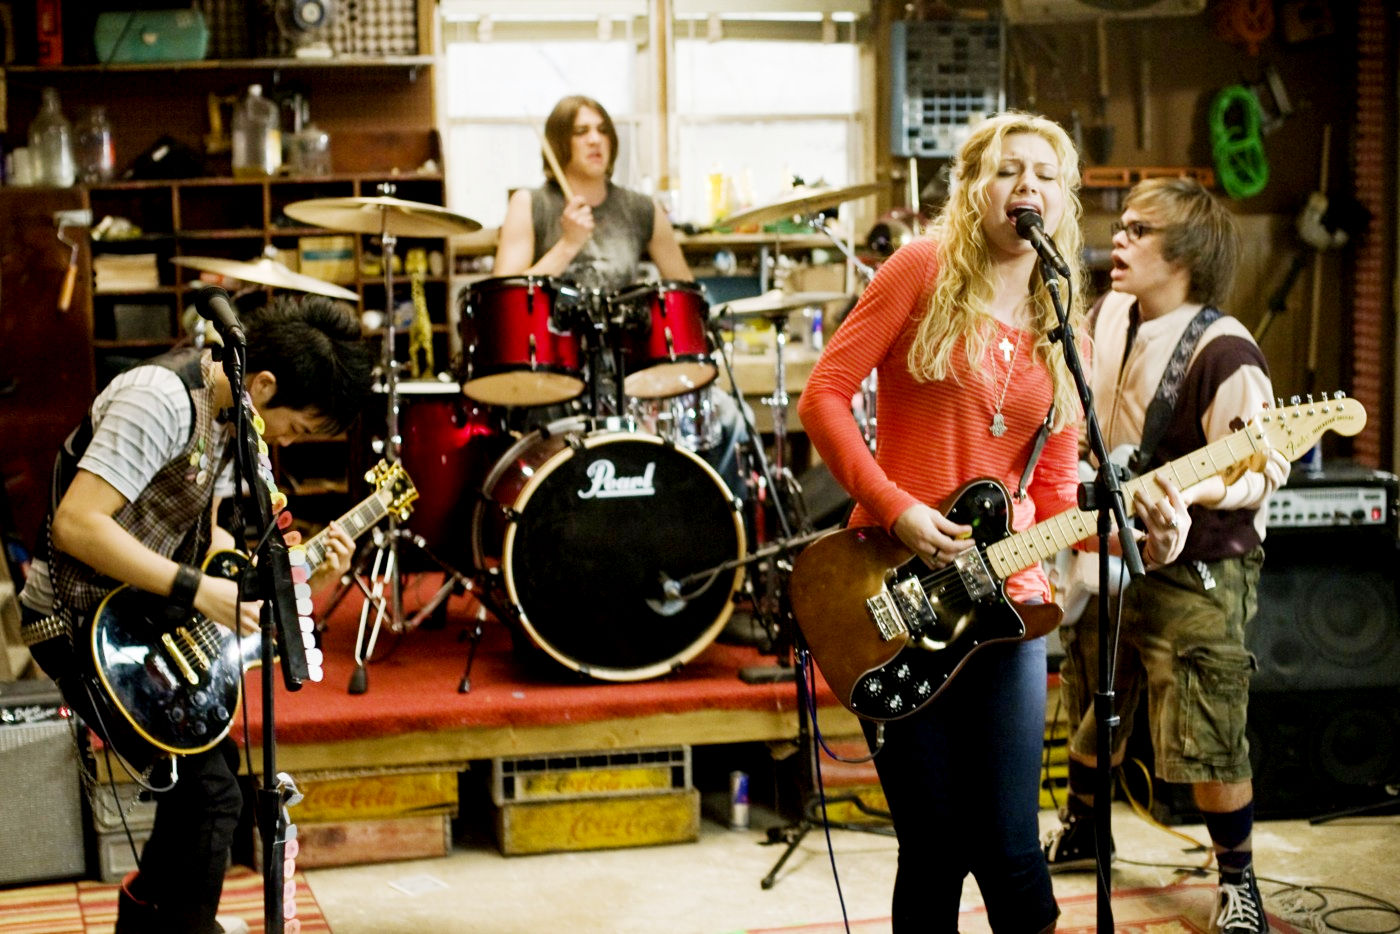 Tim Jo, Ryan Donowho, Alyson Michalka and Charlie Saxton in Summit Entertainment's Bandslam (2009)